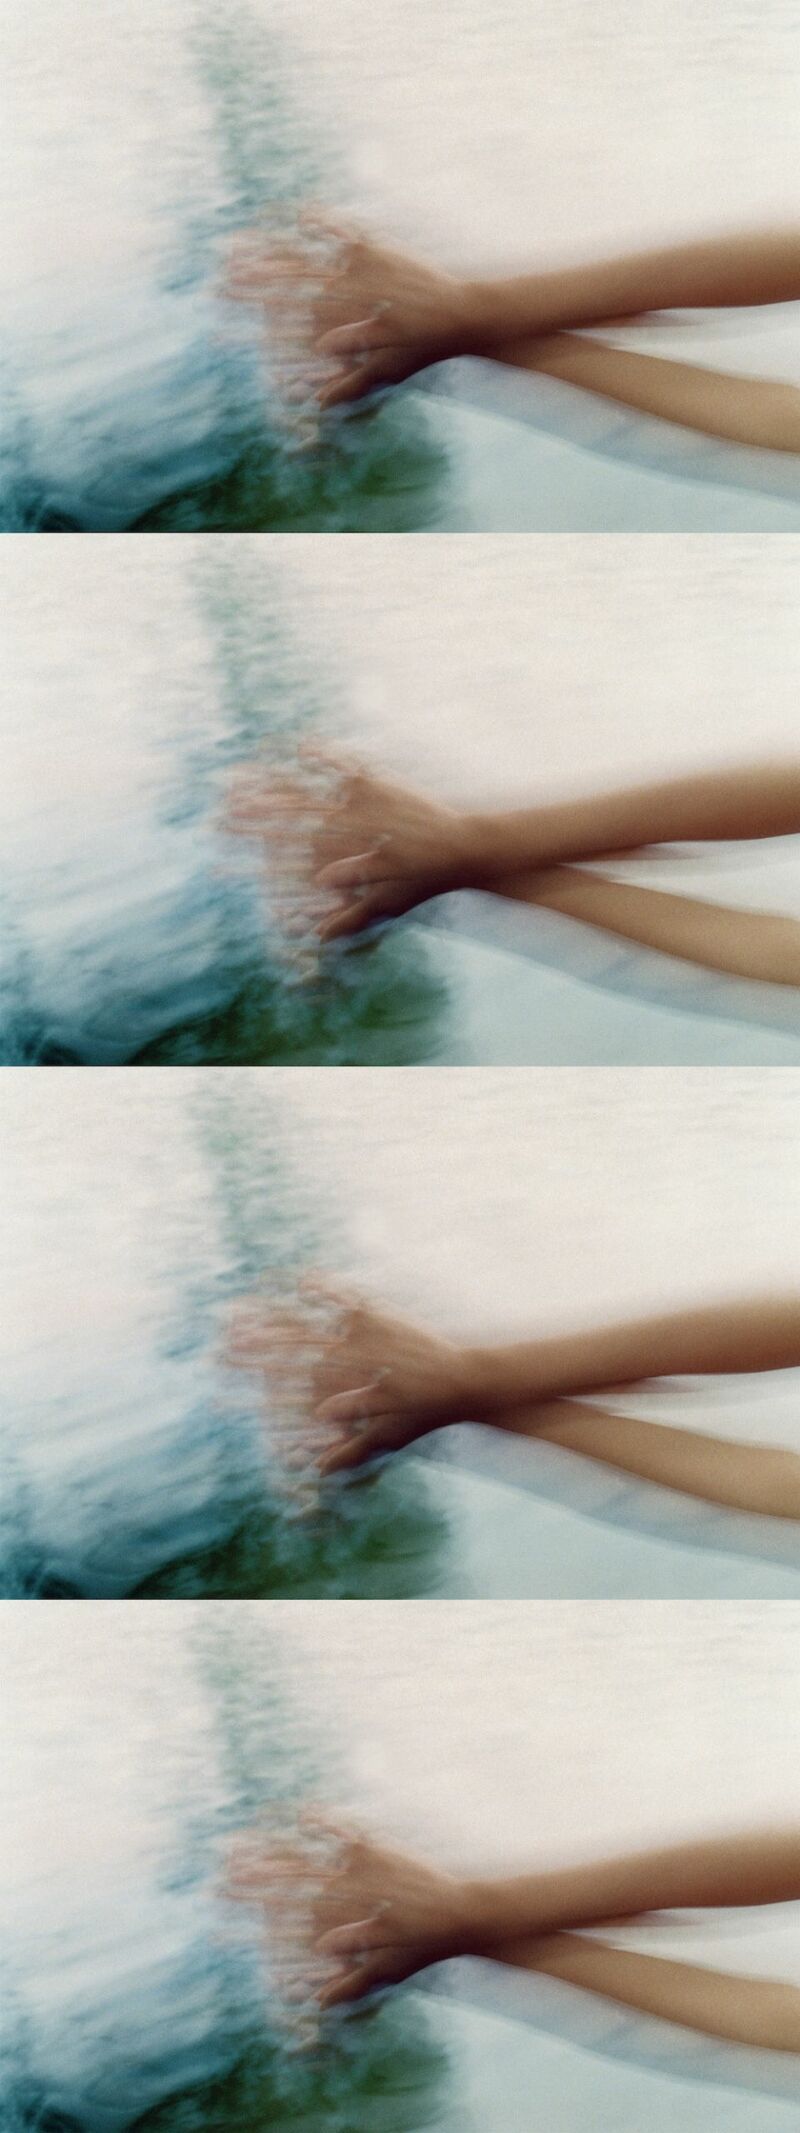 I want to be blurred and faded 03 - a Photographic Art by Karin Shikata